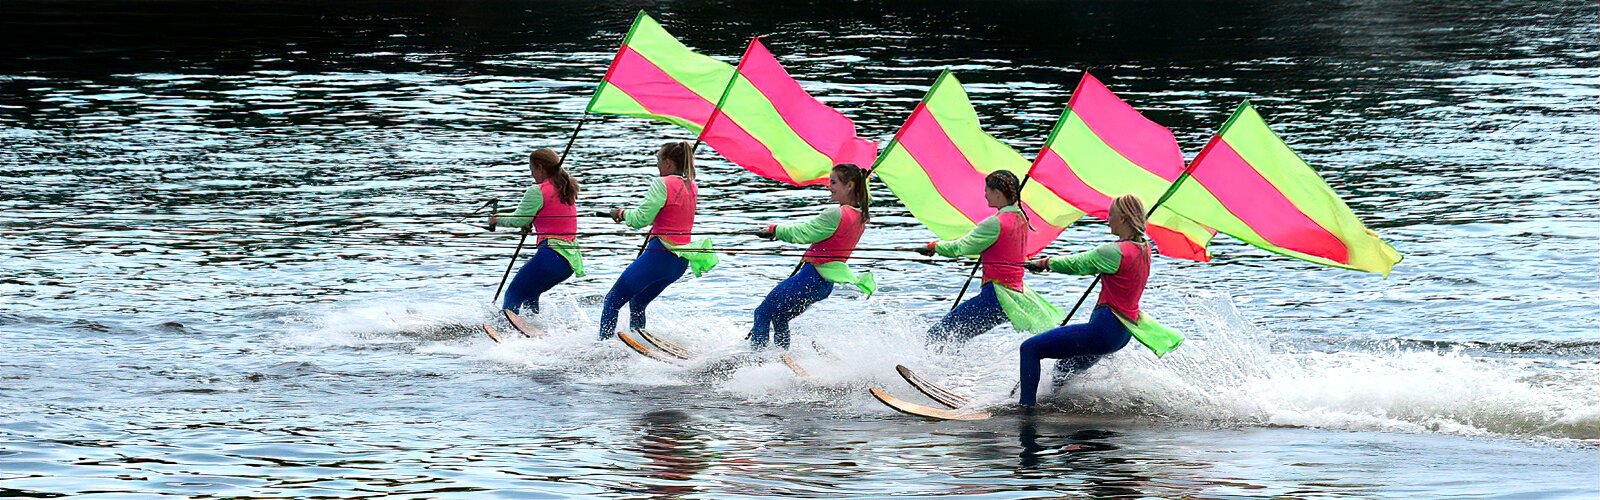 The Tampa Bay Water Ski Show Team has been performing in the region for half a century.